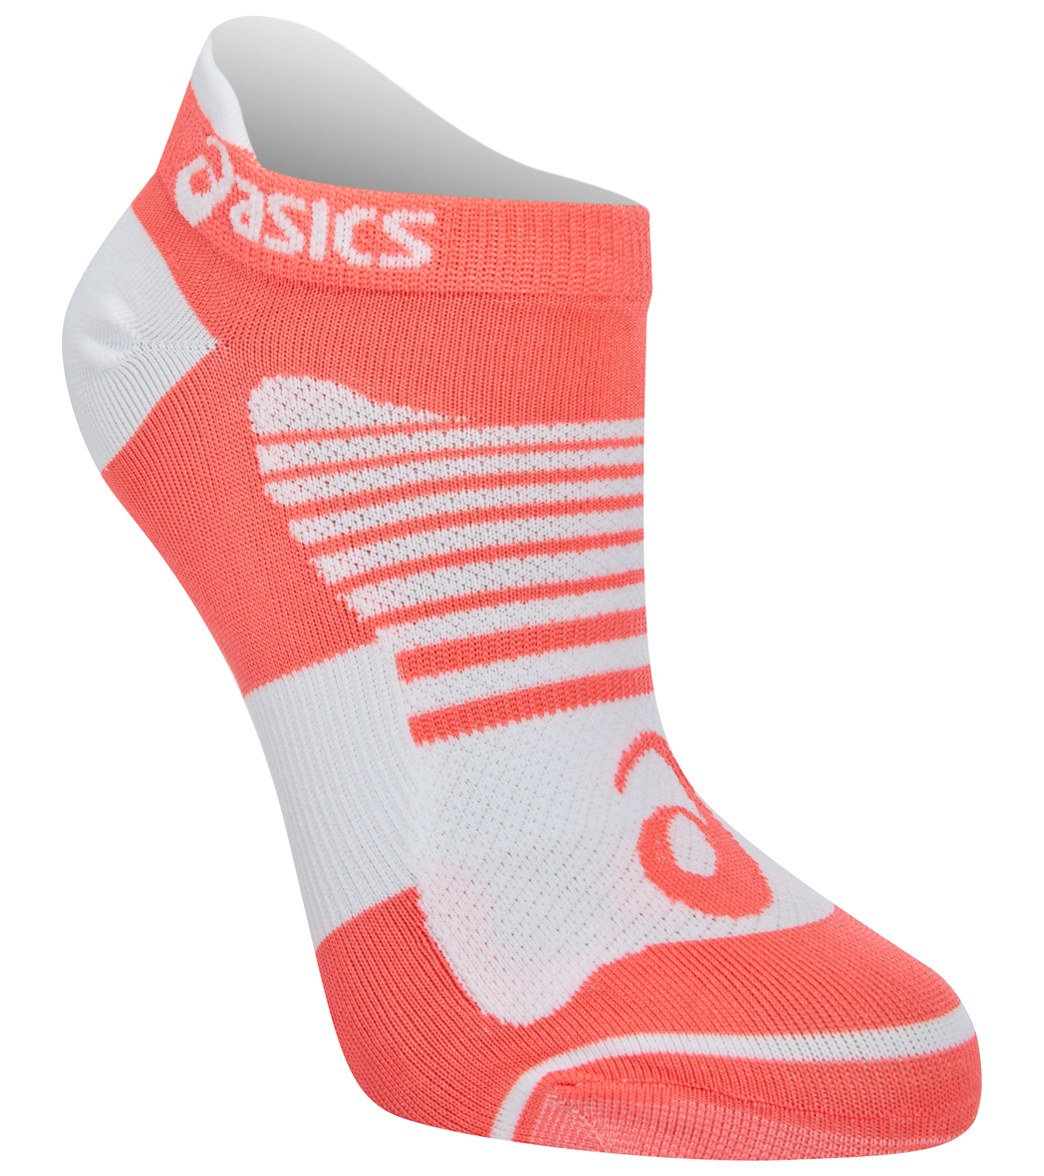 Asics Women's Quick Lyte Plus Socks 3 Pack - Mint Tint/Diva Pink/Gentry Purple Small Size Small - Swimoutlet.com